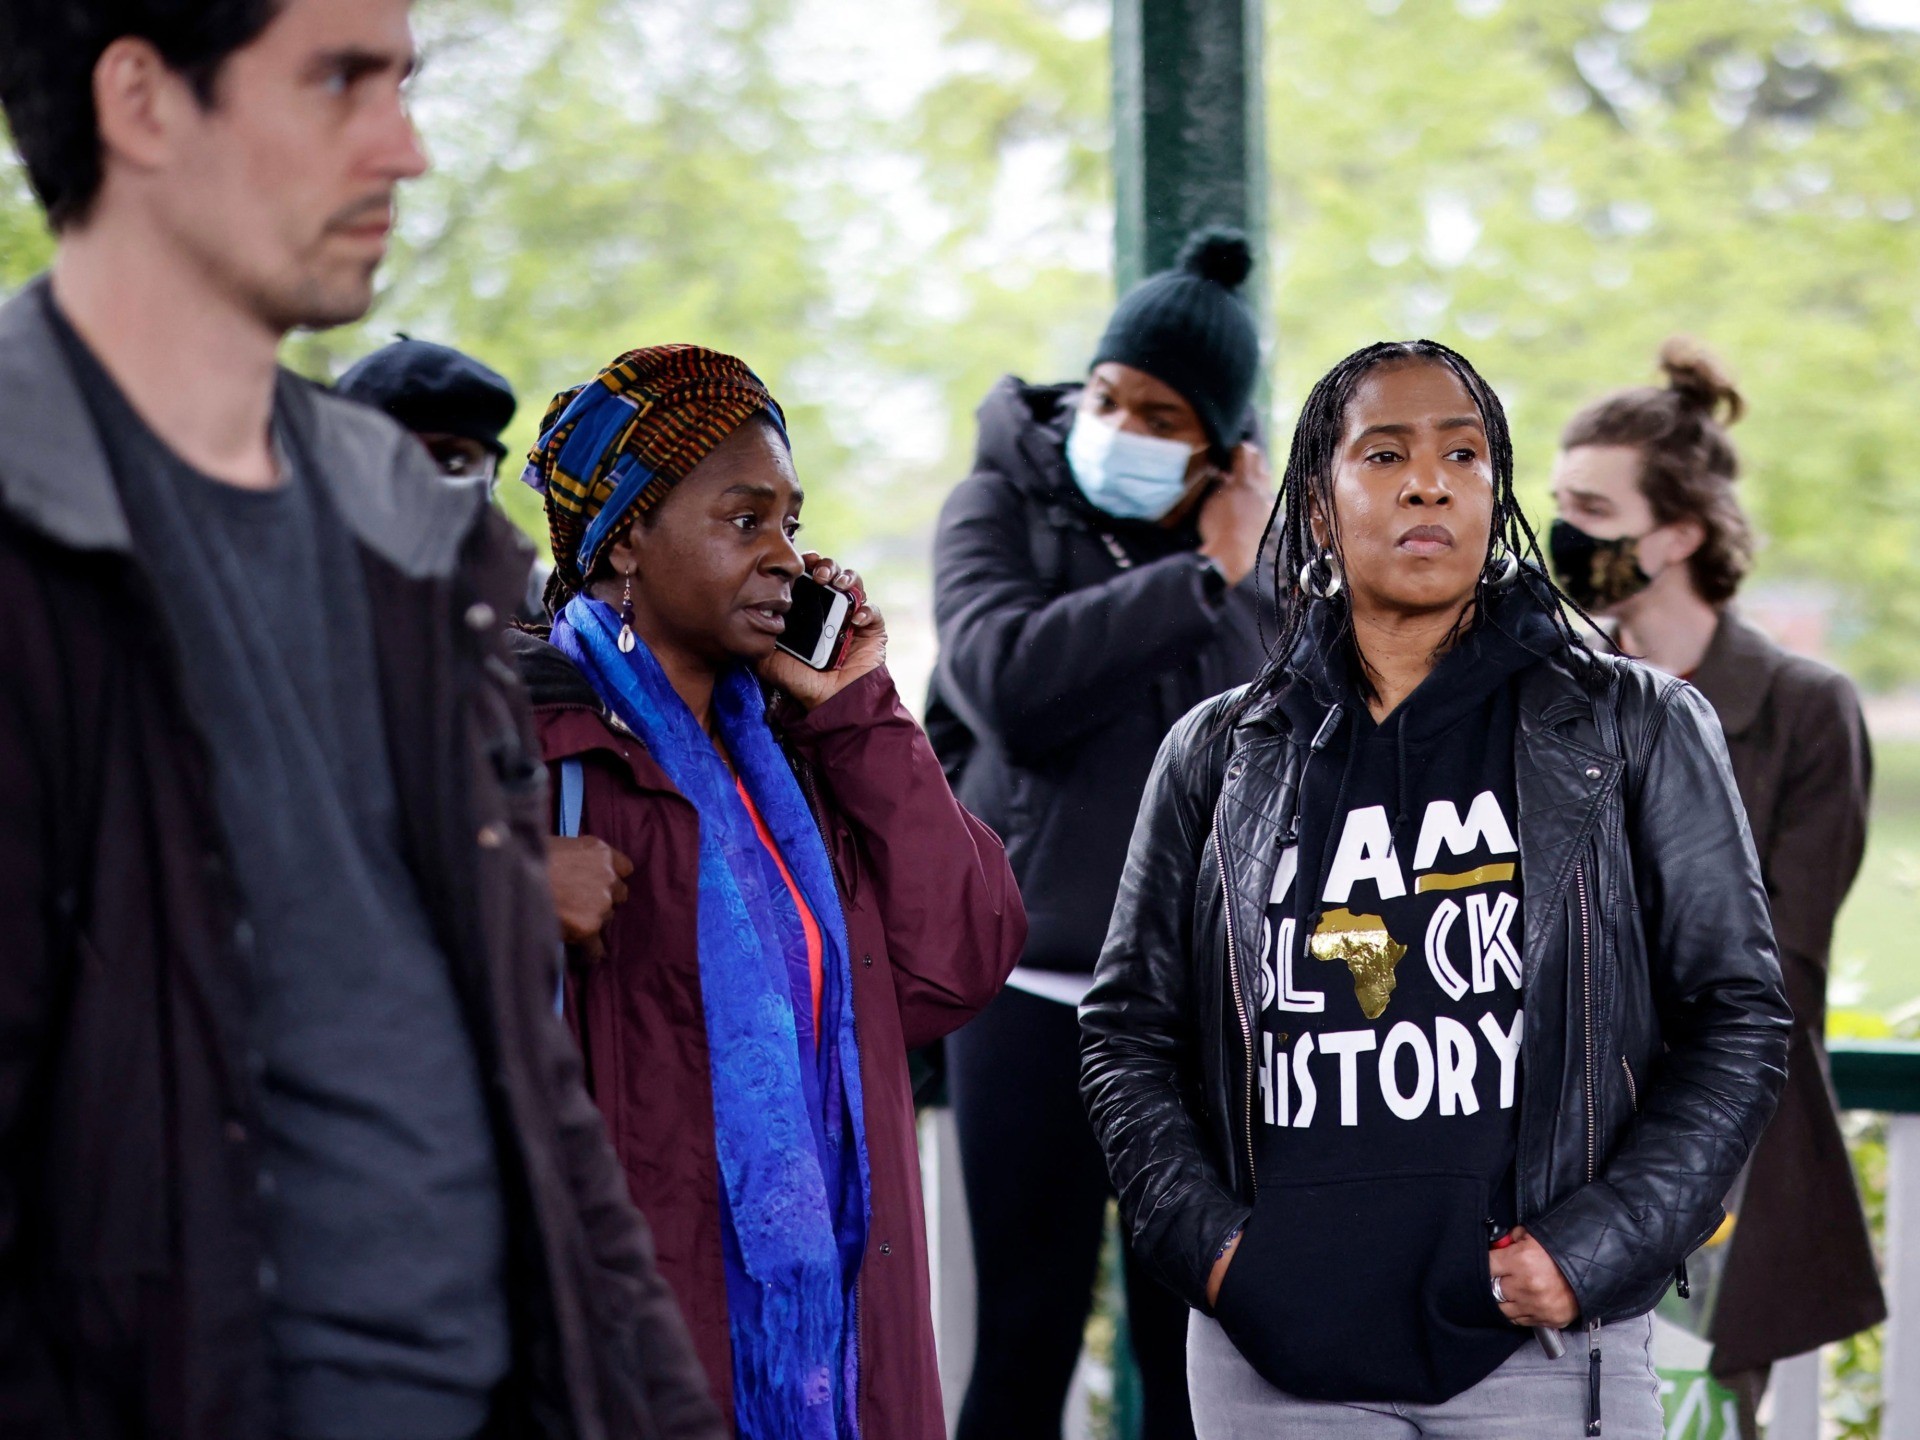 People attend a vigil for activist Sasha Johnson at the bandstand in Ruskin Park in London on May 24, 2021. - Black equal rights activist Sasha Johnson was on Monday in hospital after being caught up in gunfire when violence erupted at a party in south-east London, in the early hours of the morning on May 23. Police said there is no evidence that the 27-year-old campaigner was the intended target of the shooting. (Photo by Tolga Akmen / AFP) (Photo by TOLGA AKMEN/AFP via Getty Images)